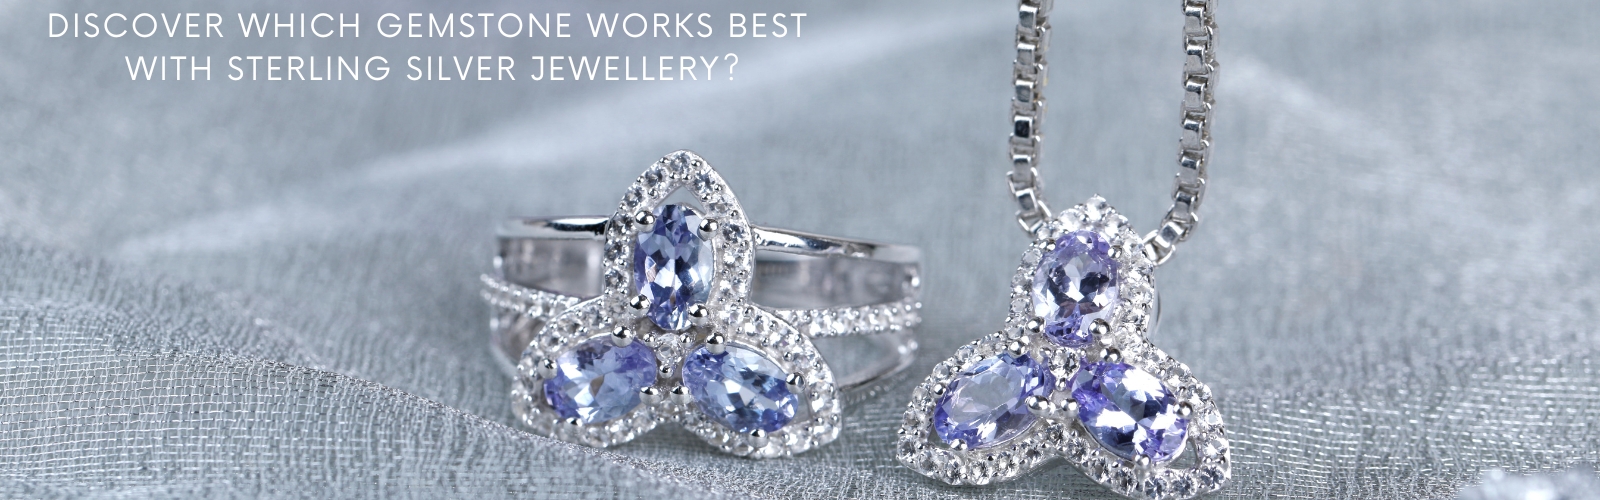 discover which gemstone works best with sterling silver jewellery